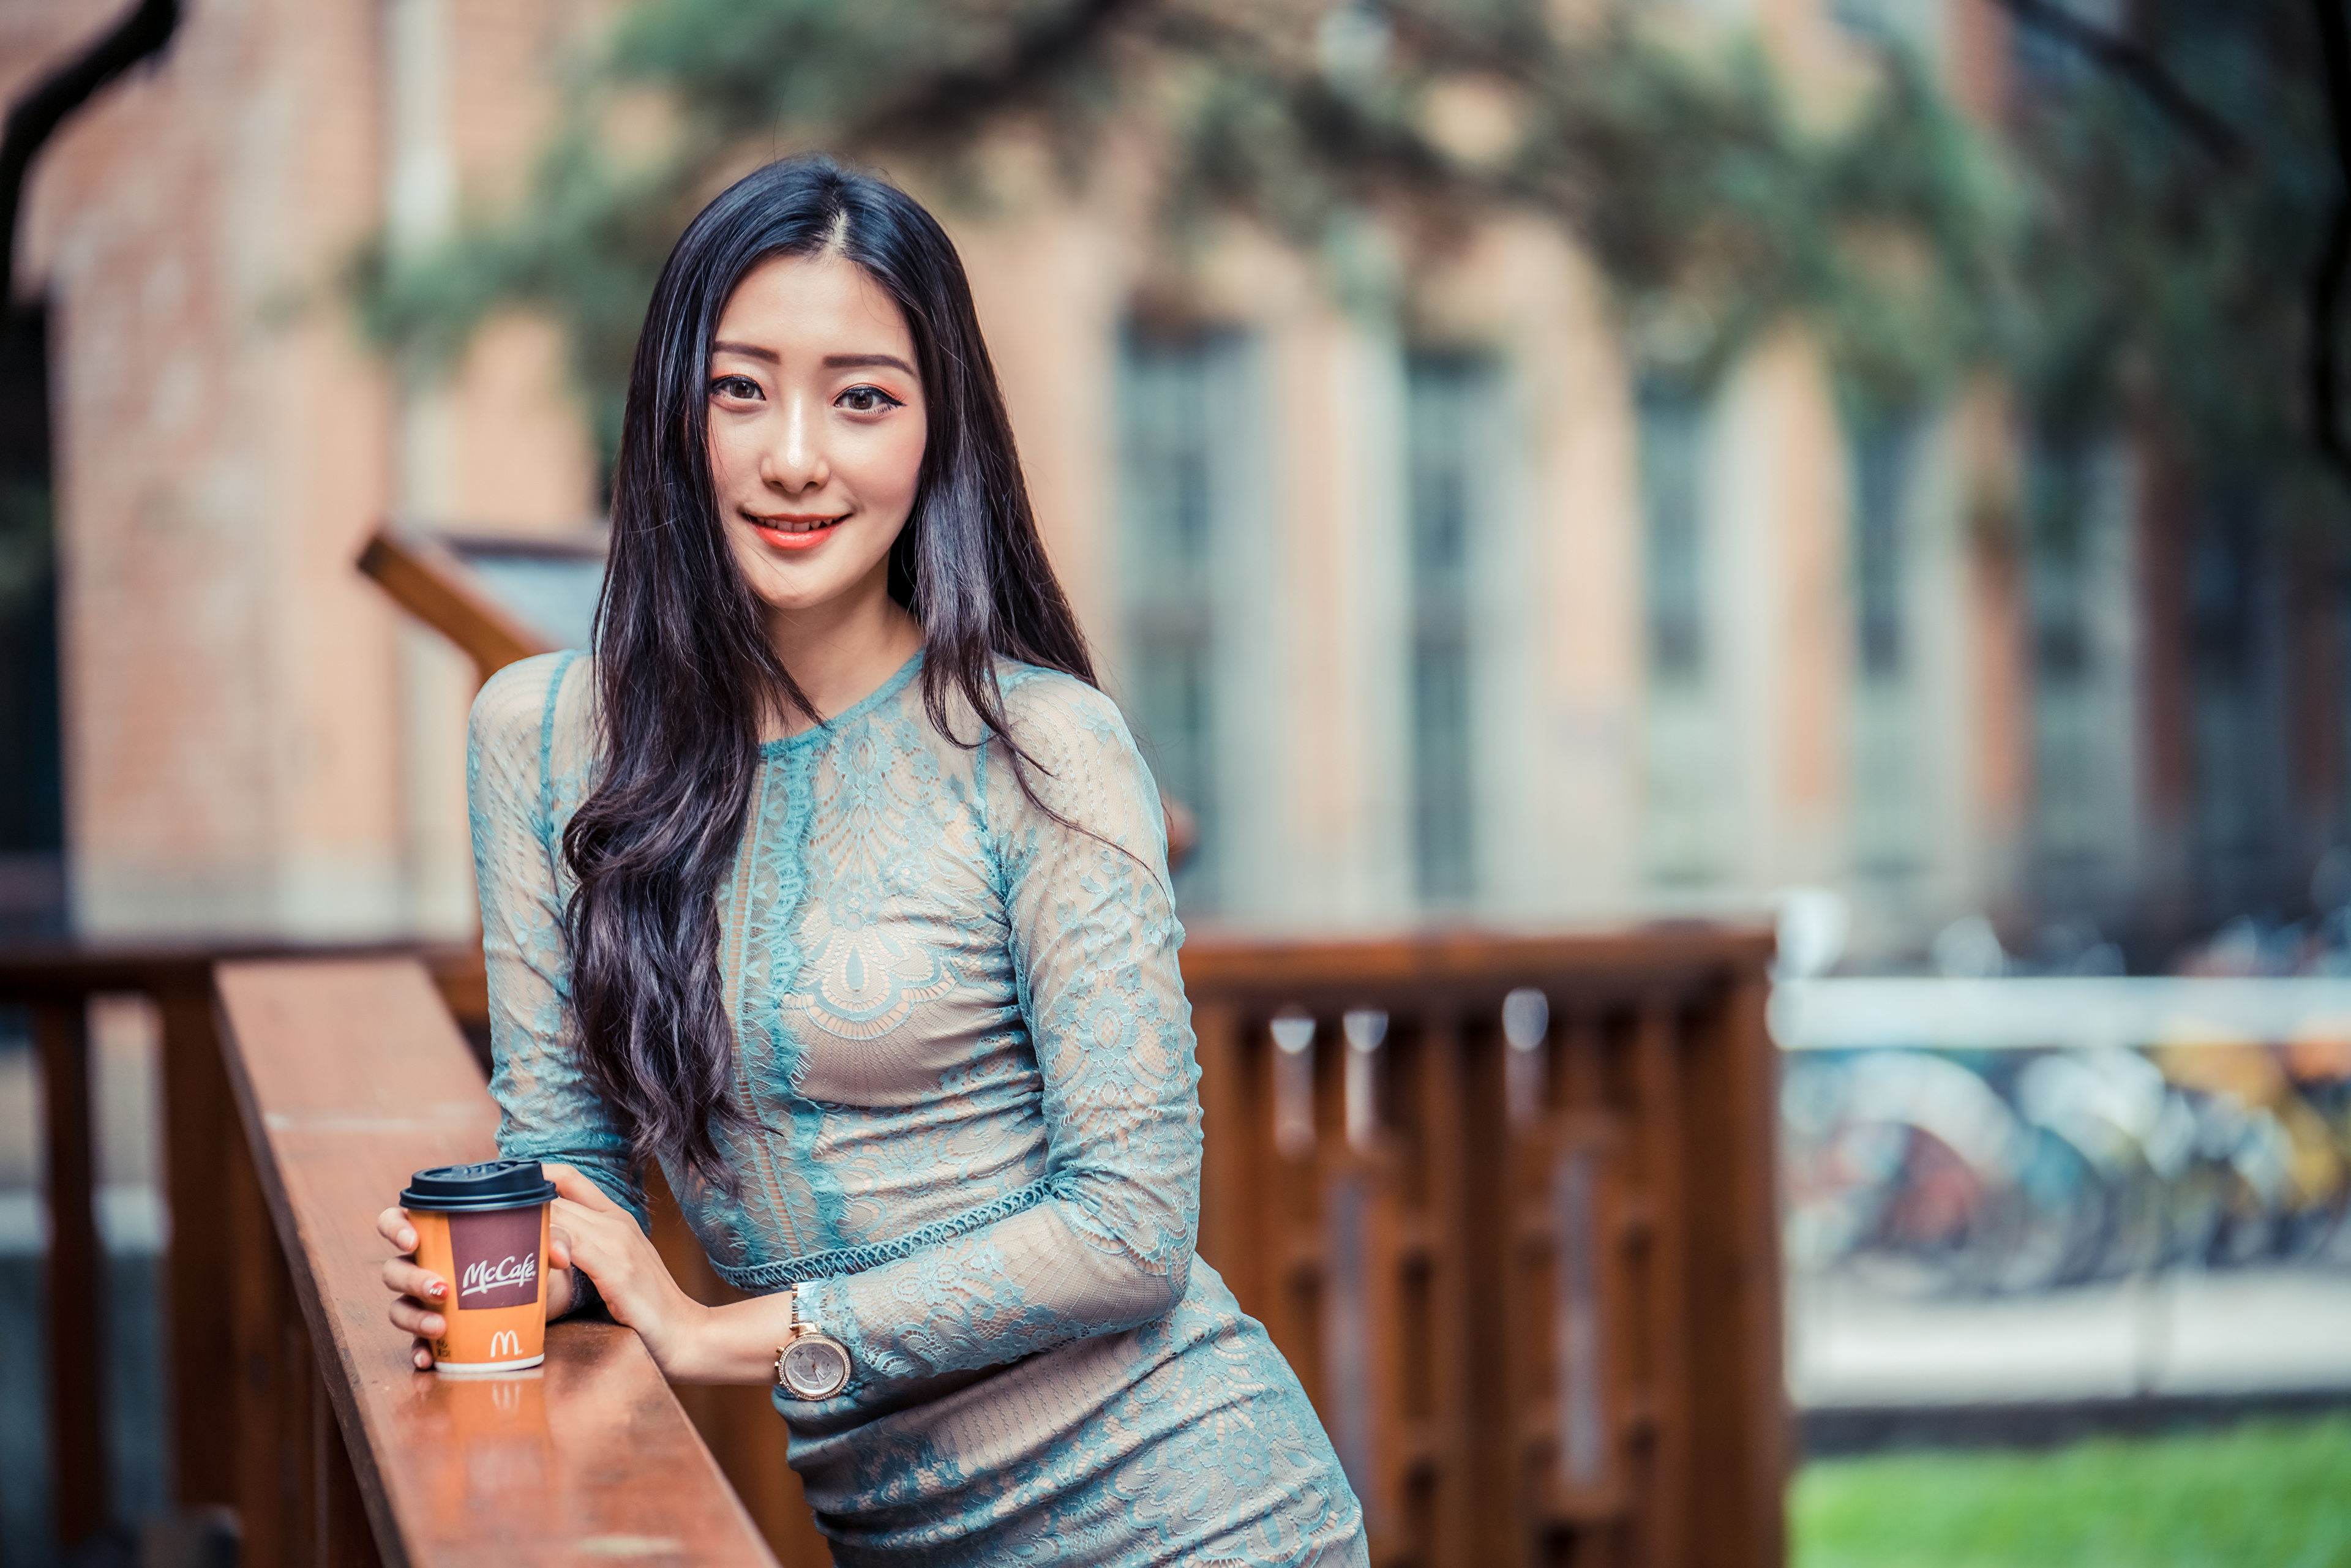 Asian Model Women Long Hair Brunette Depth Of Field Trees House Railing Coffee Cup Bycicle Grass Wri 3840x2561